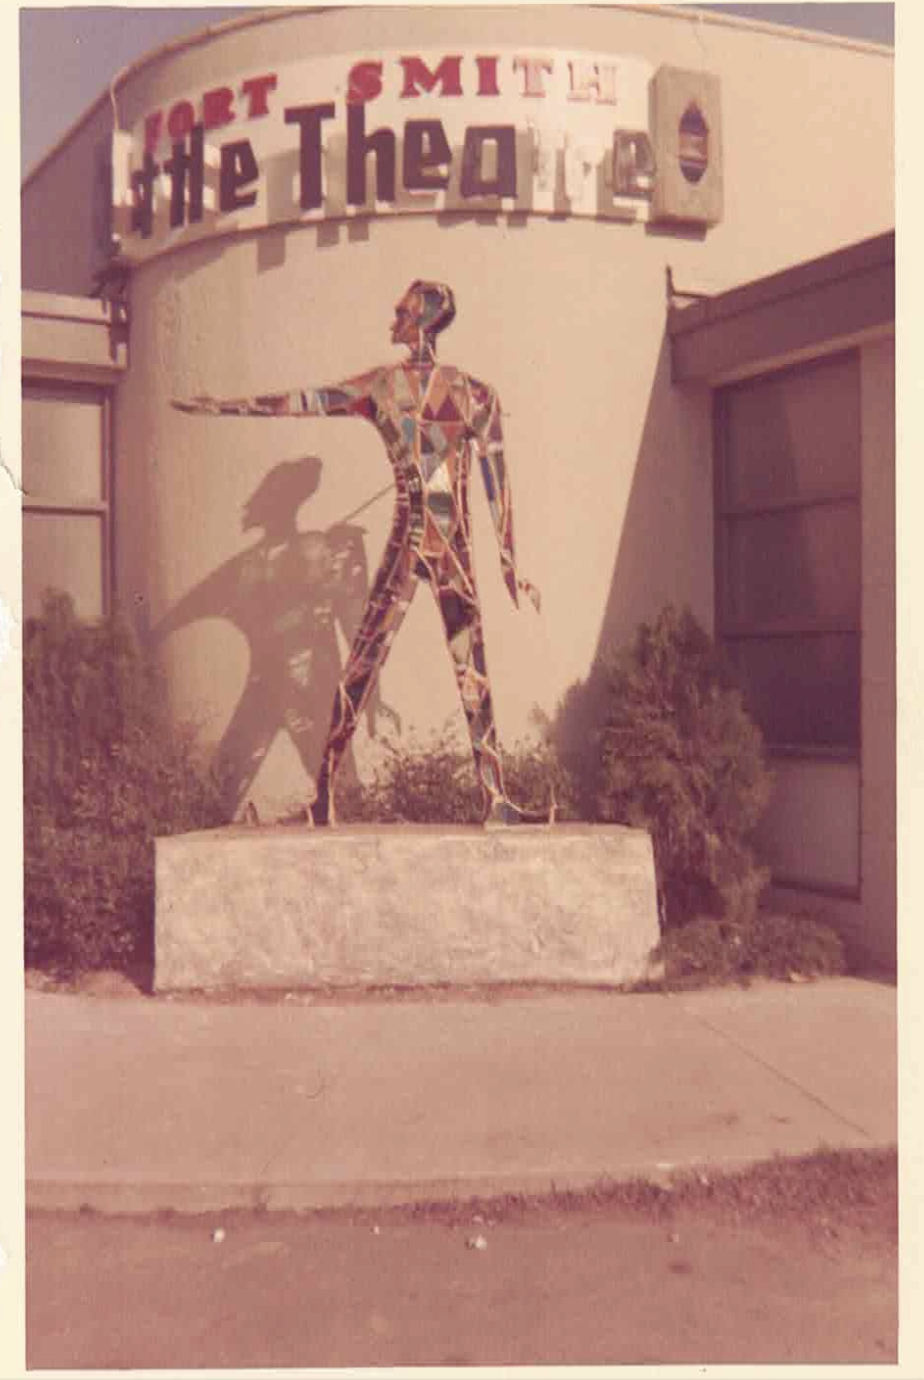 The Harlequin Man stands outside the Fort Smith Little Theatre at its North O Street location. The sculpture made the move to the North 6th Street building in the 1980s where it still stands.